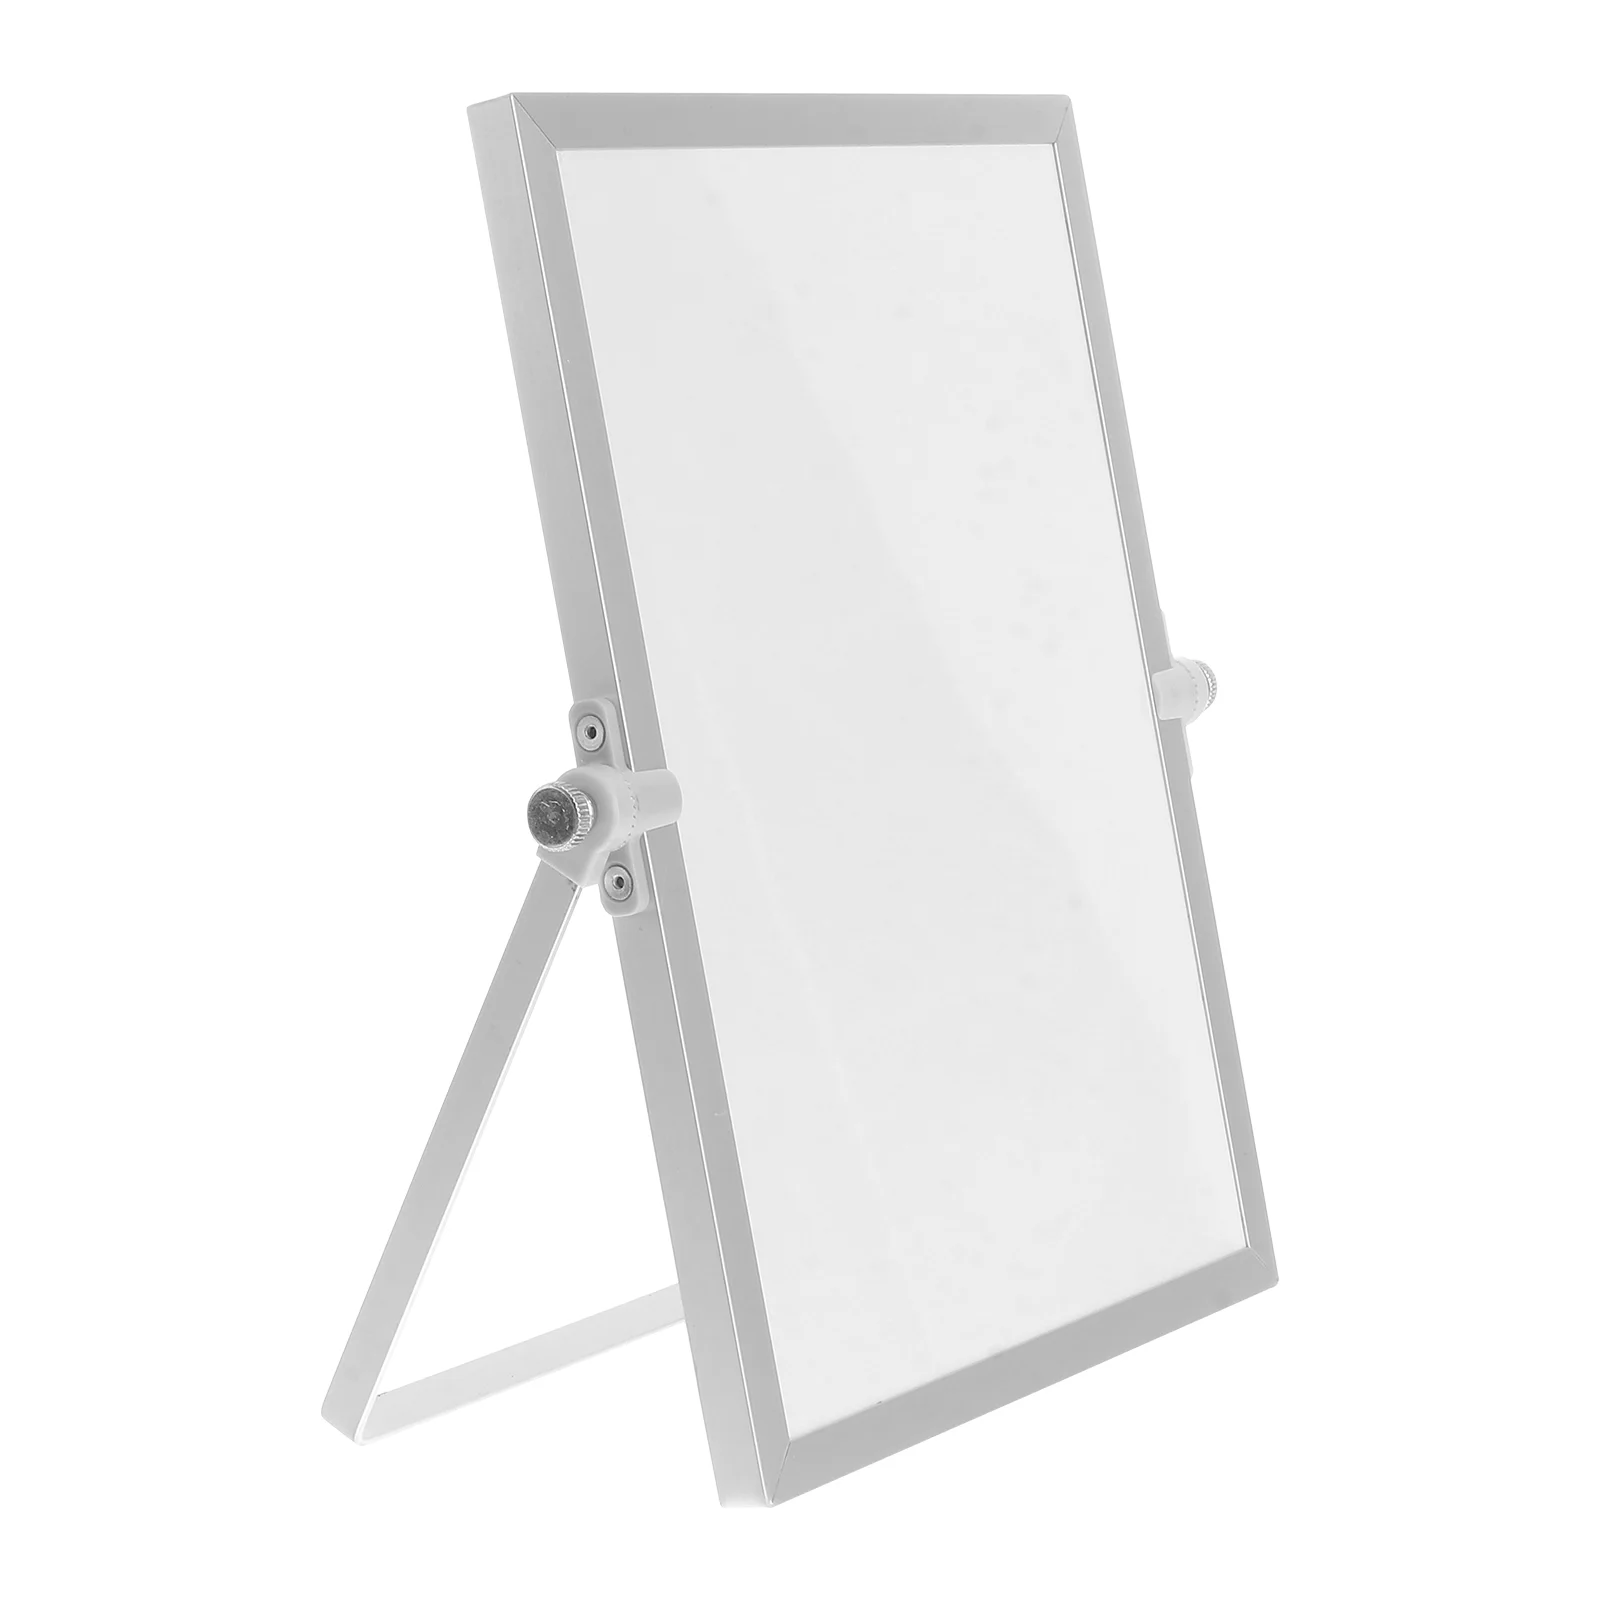 

Desktop Small White Board Mini Easel Stand Office Supplies Planner Reminder Chalkboard Portable